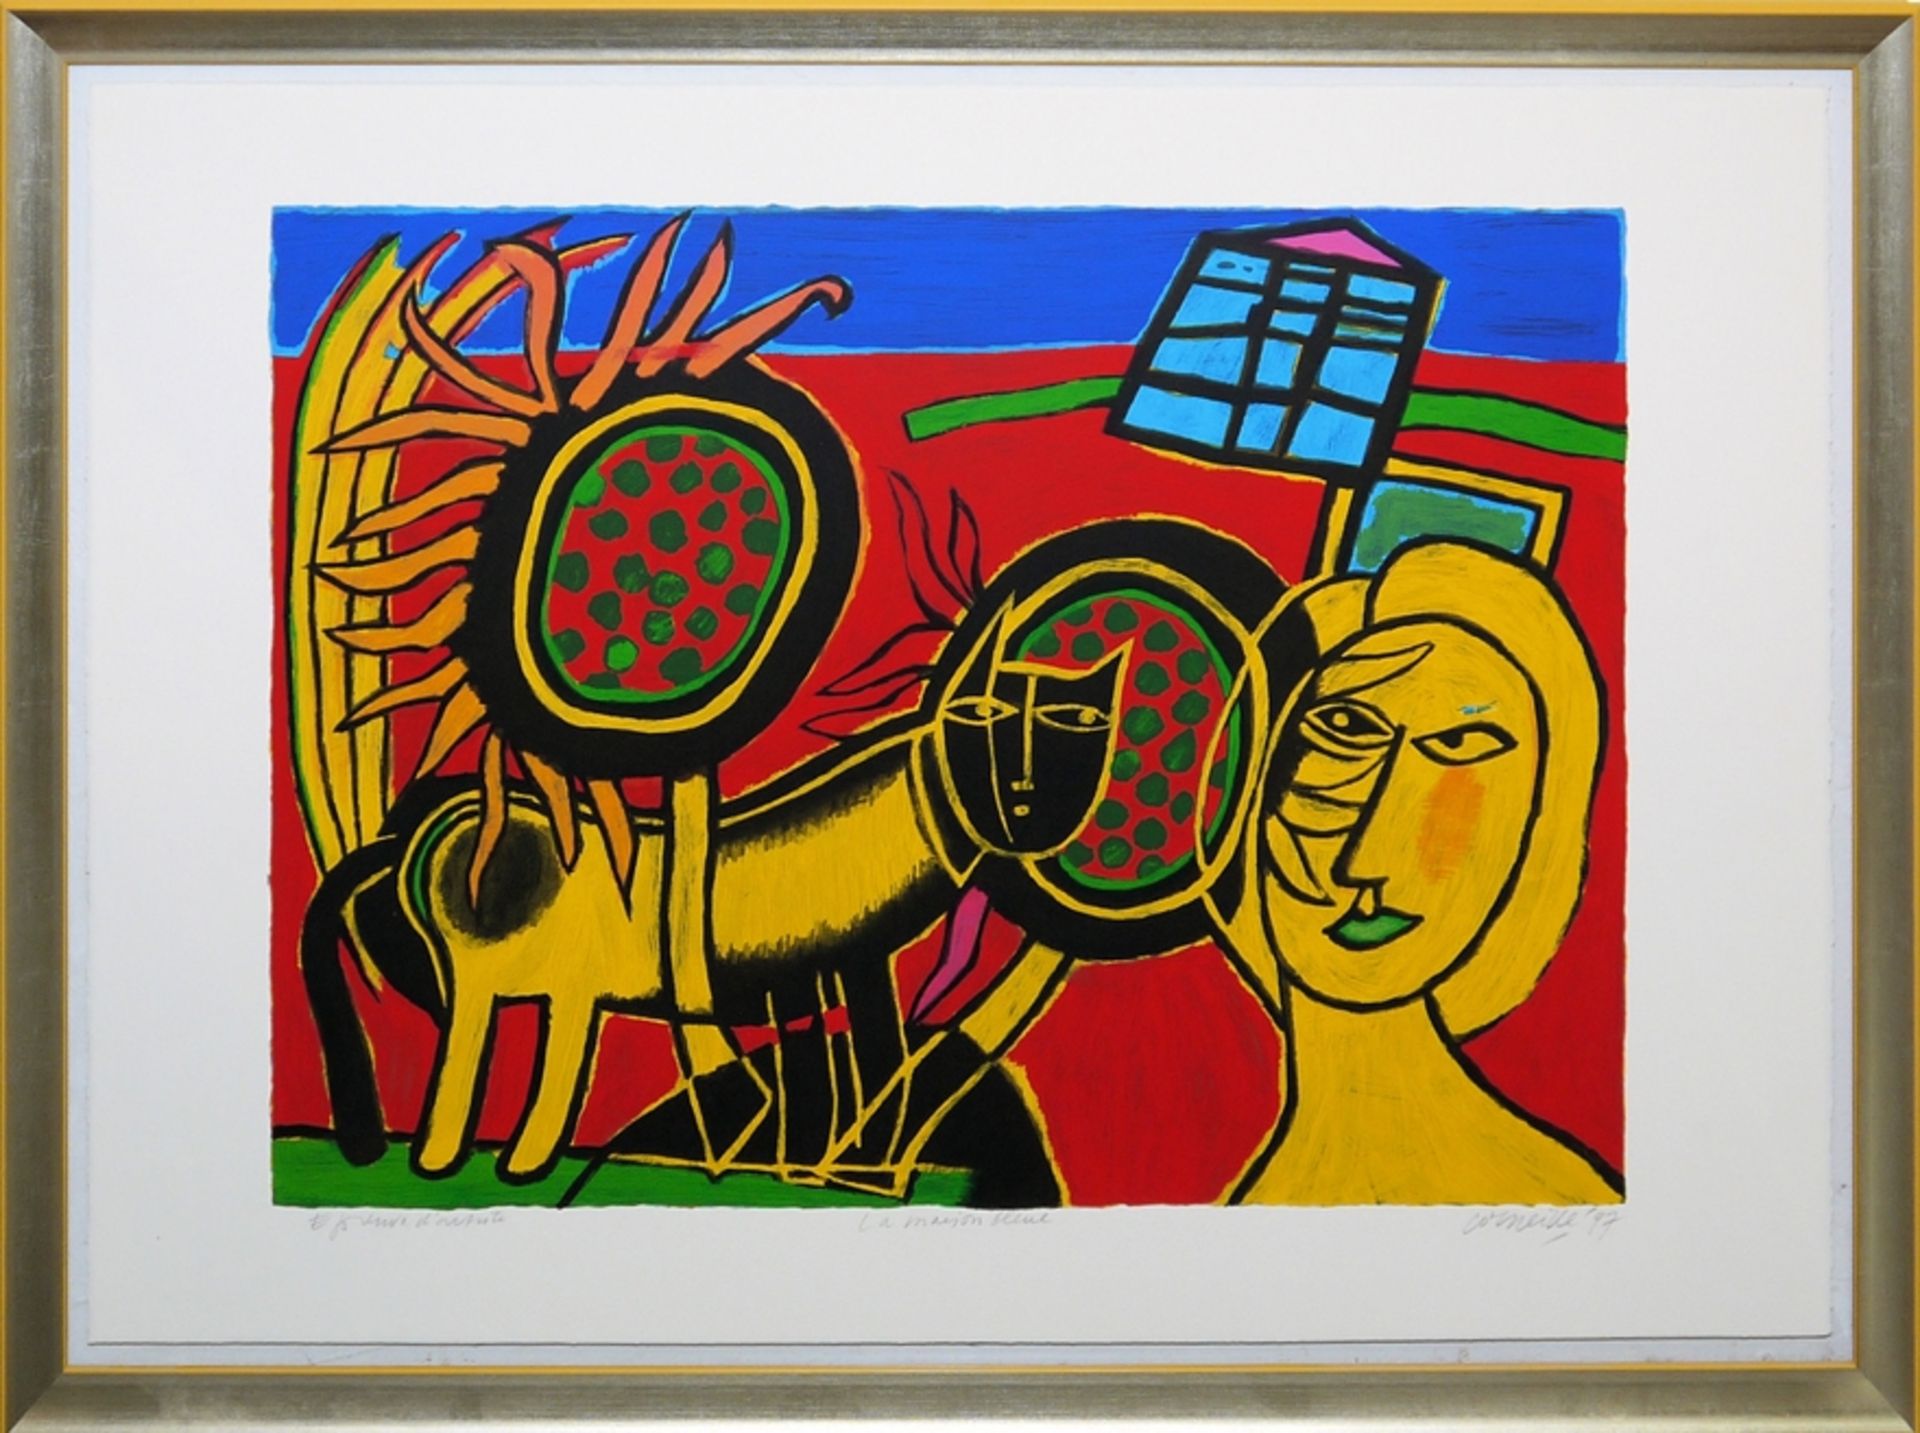 Corneille, "La maison bleue", signed colour serigraph from 1997, gallery-framed